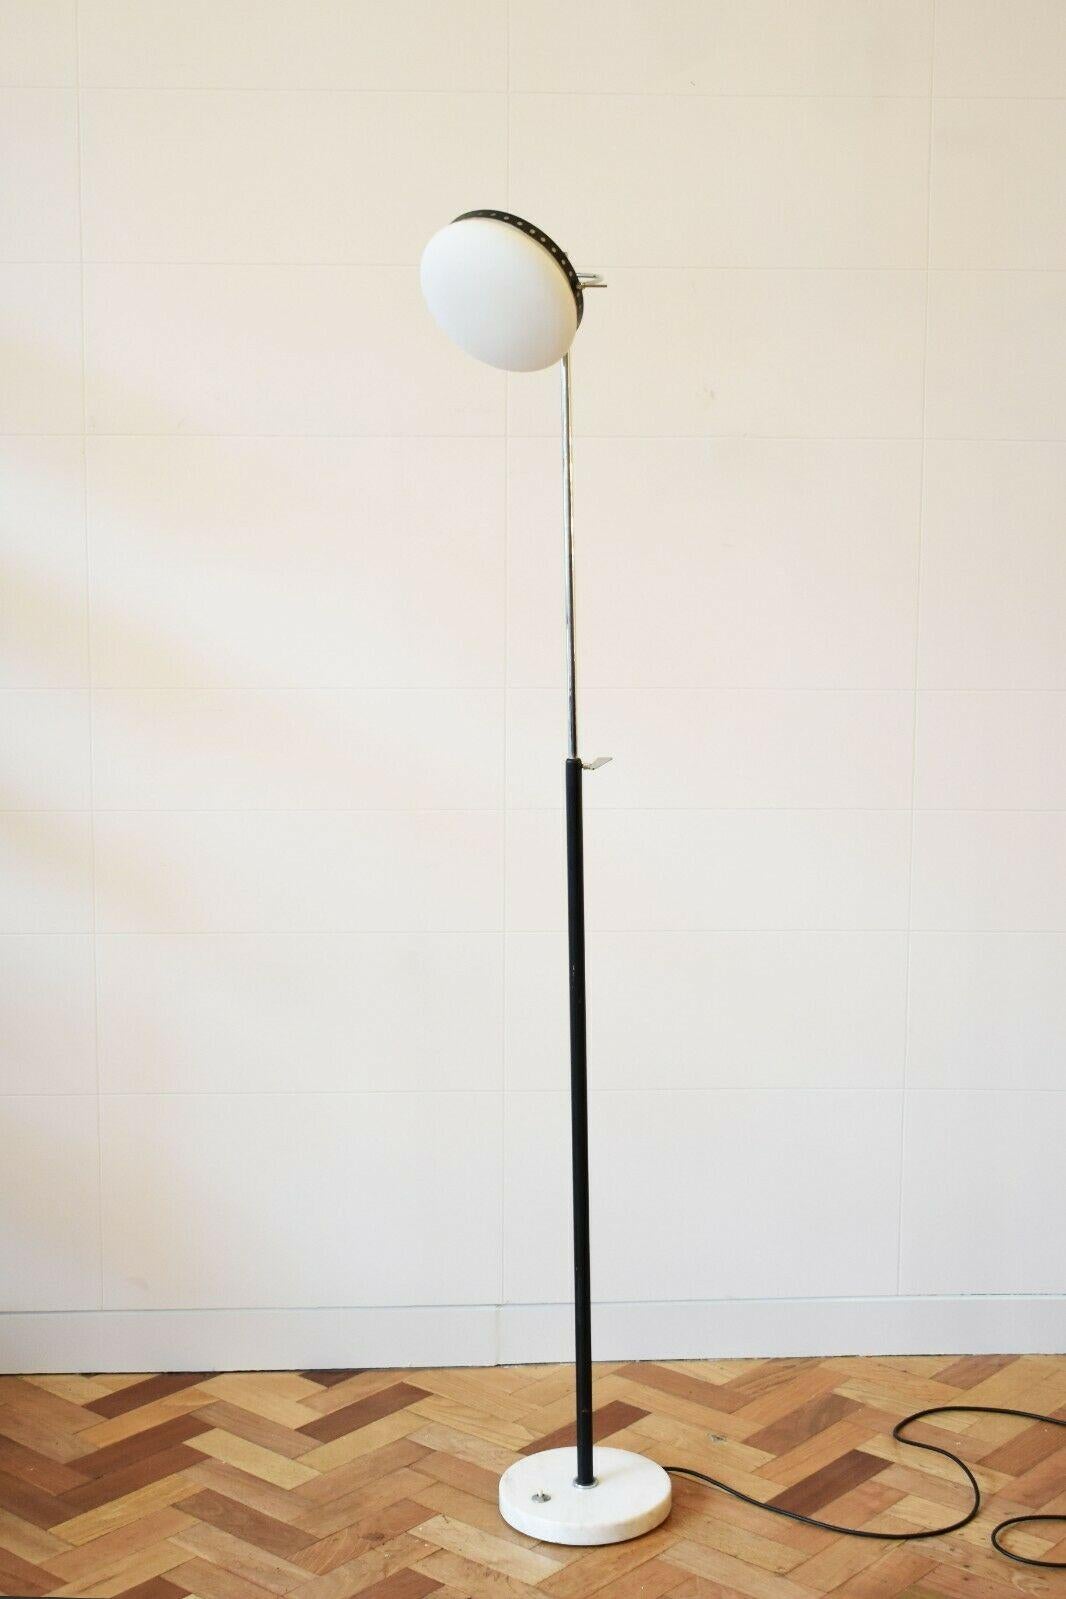 Mid-Century Modern Italian 1950s Chrome Floor Lamp with Frosted Glass, Marble Base by Stillux For Sale